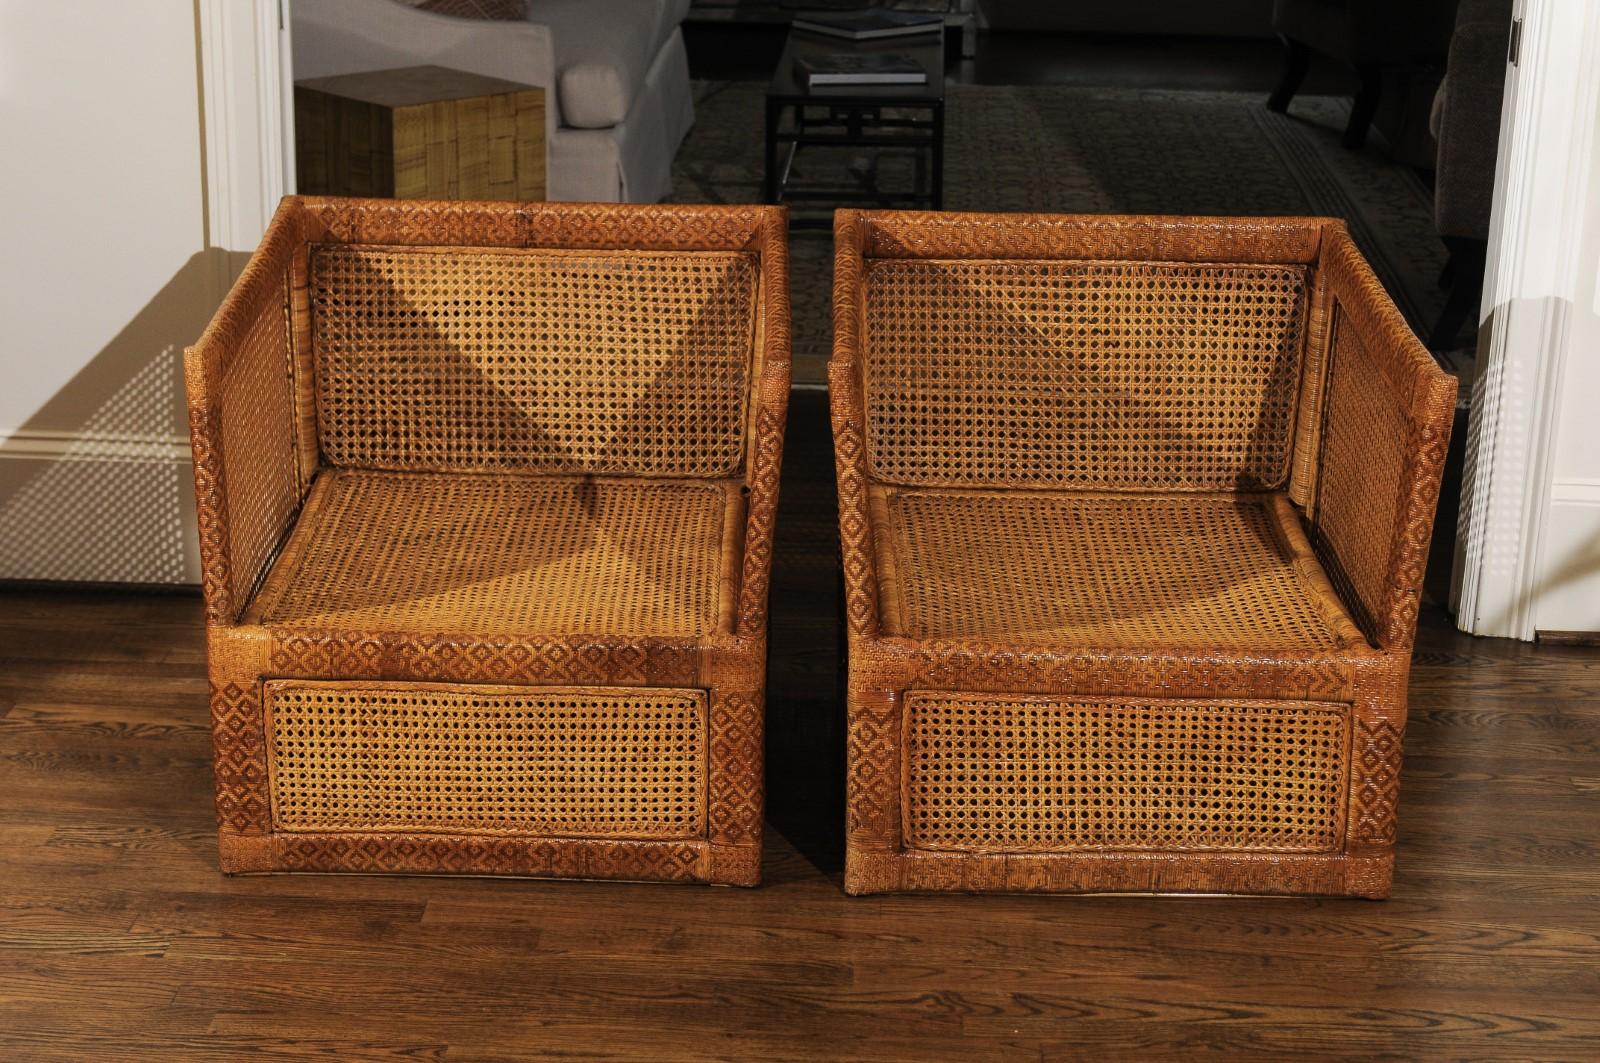 A jaw-dropping unique pair of custom-made cane cube club or lounge chairs, circa 1970. Solid mahogany frame painstakingly hand-wrapped in cane executed to look like rattlesnake, with French cane inset panels. Design, craftsmanship and quality that